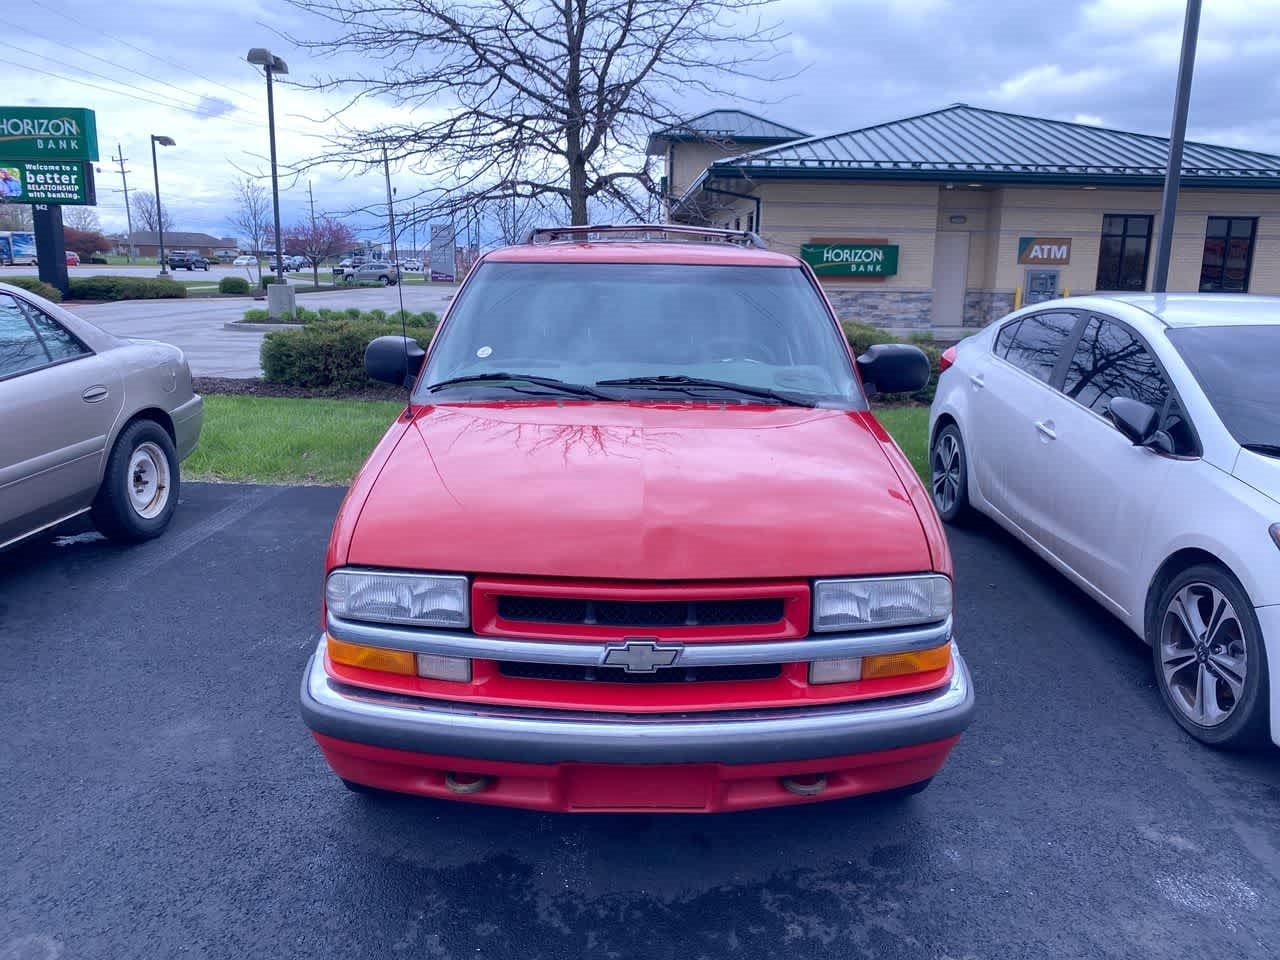 Used 2000 Chevrolet Blazer LT with VIN 1GNDT13W6Y2358533 for sale in Greenwood, IN